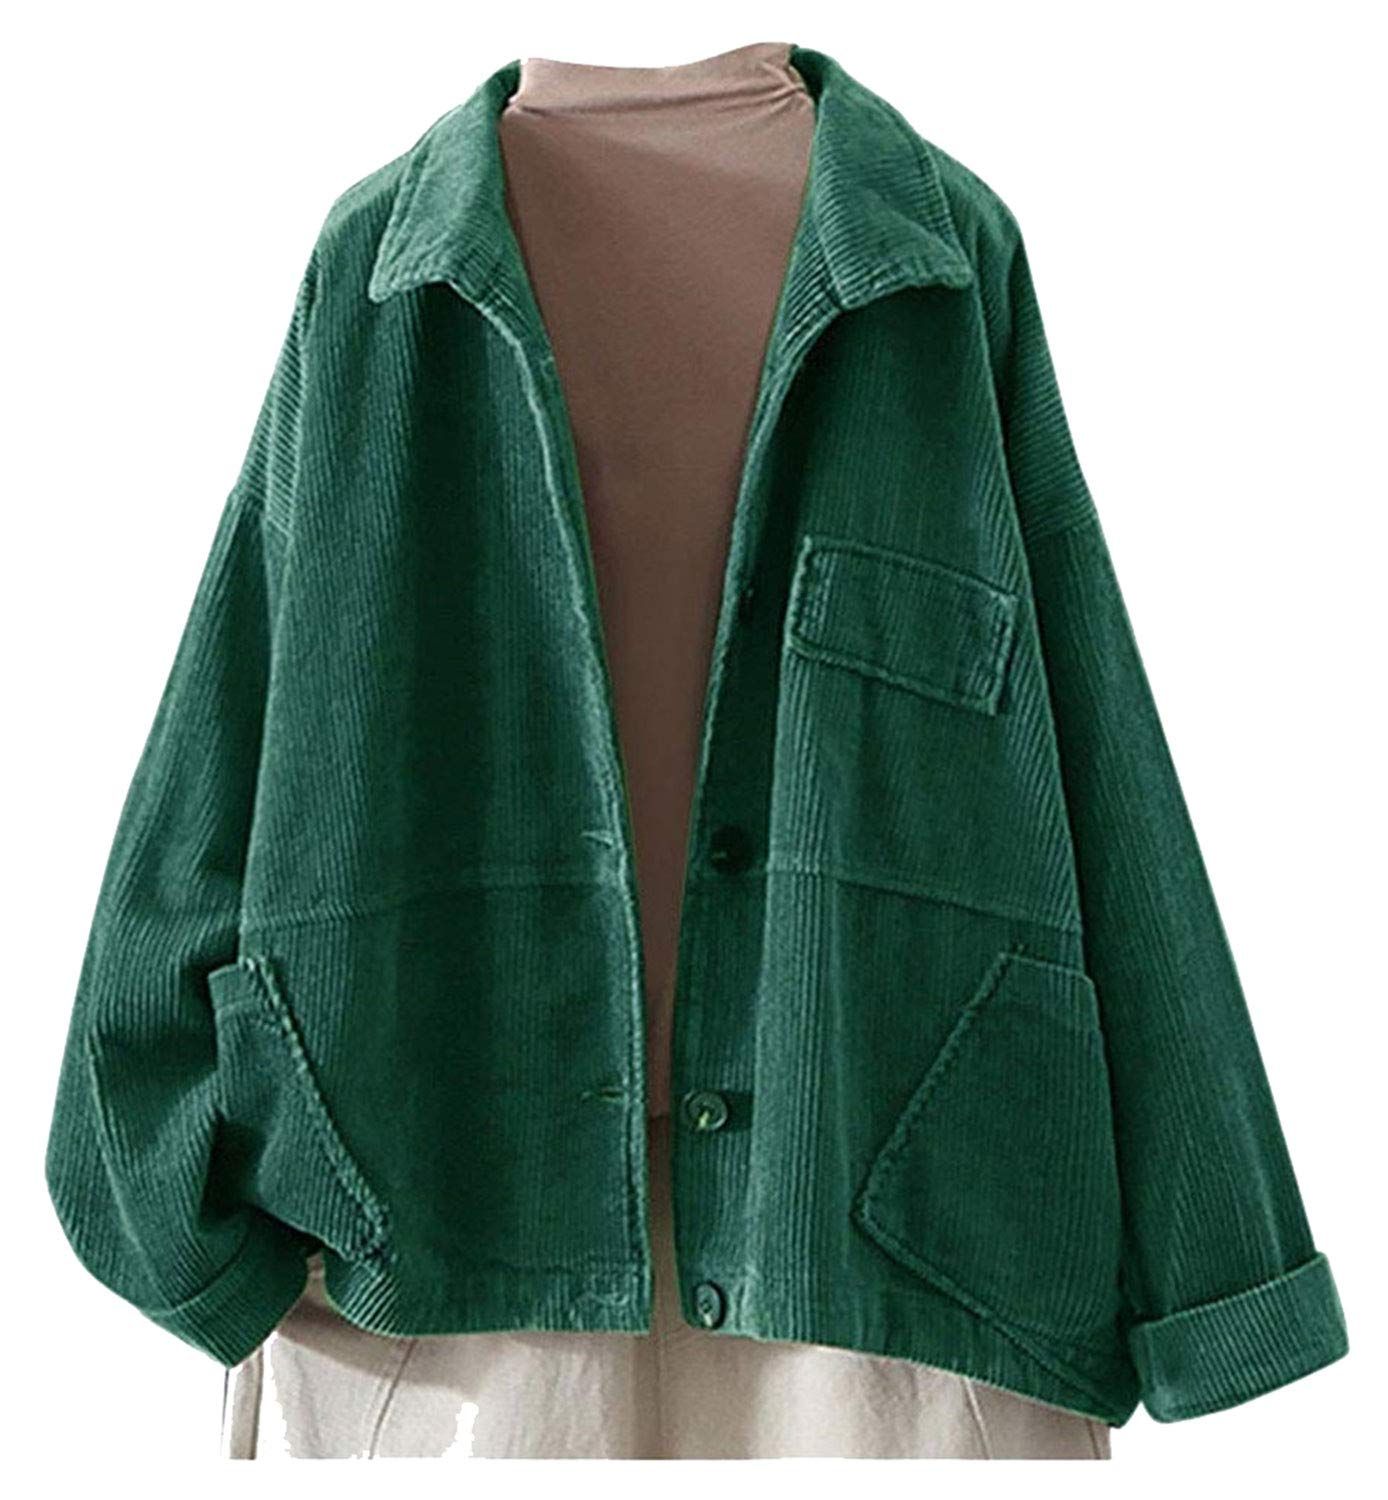 Get trendy womens jacket to look stylish
this fall season